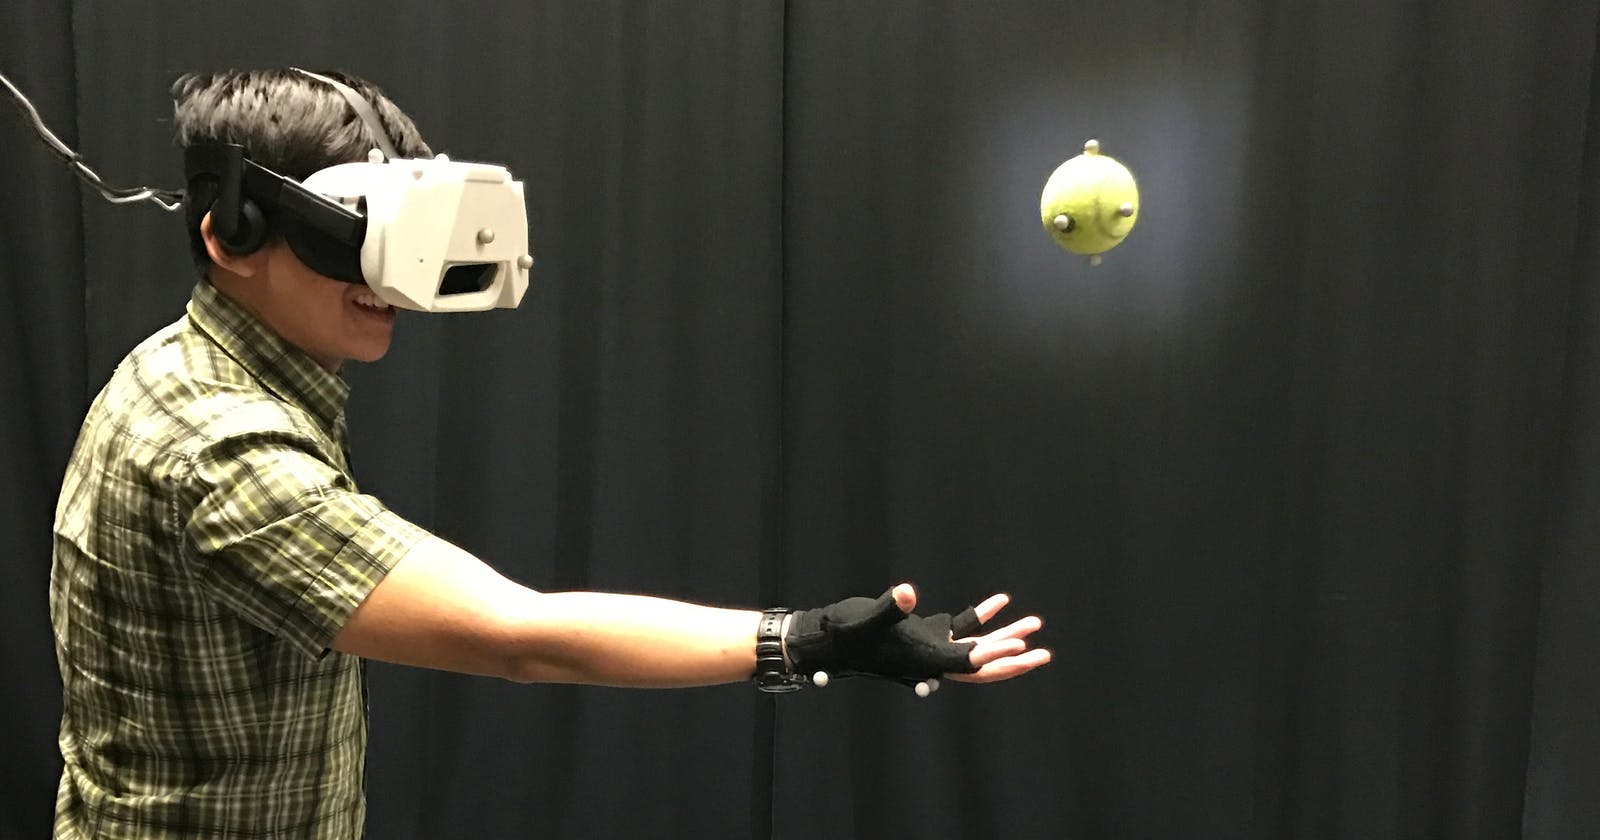 Watch this guy catch a real ball in VR